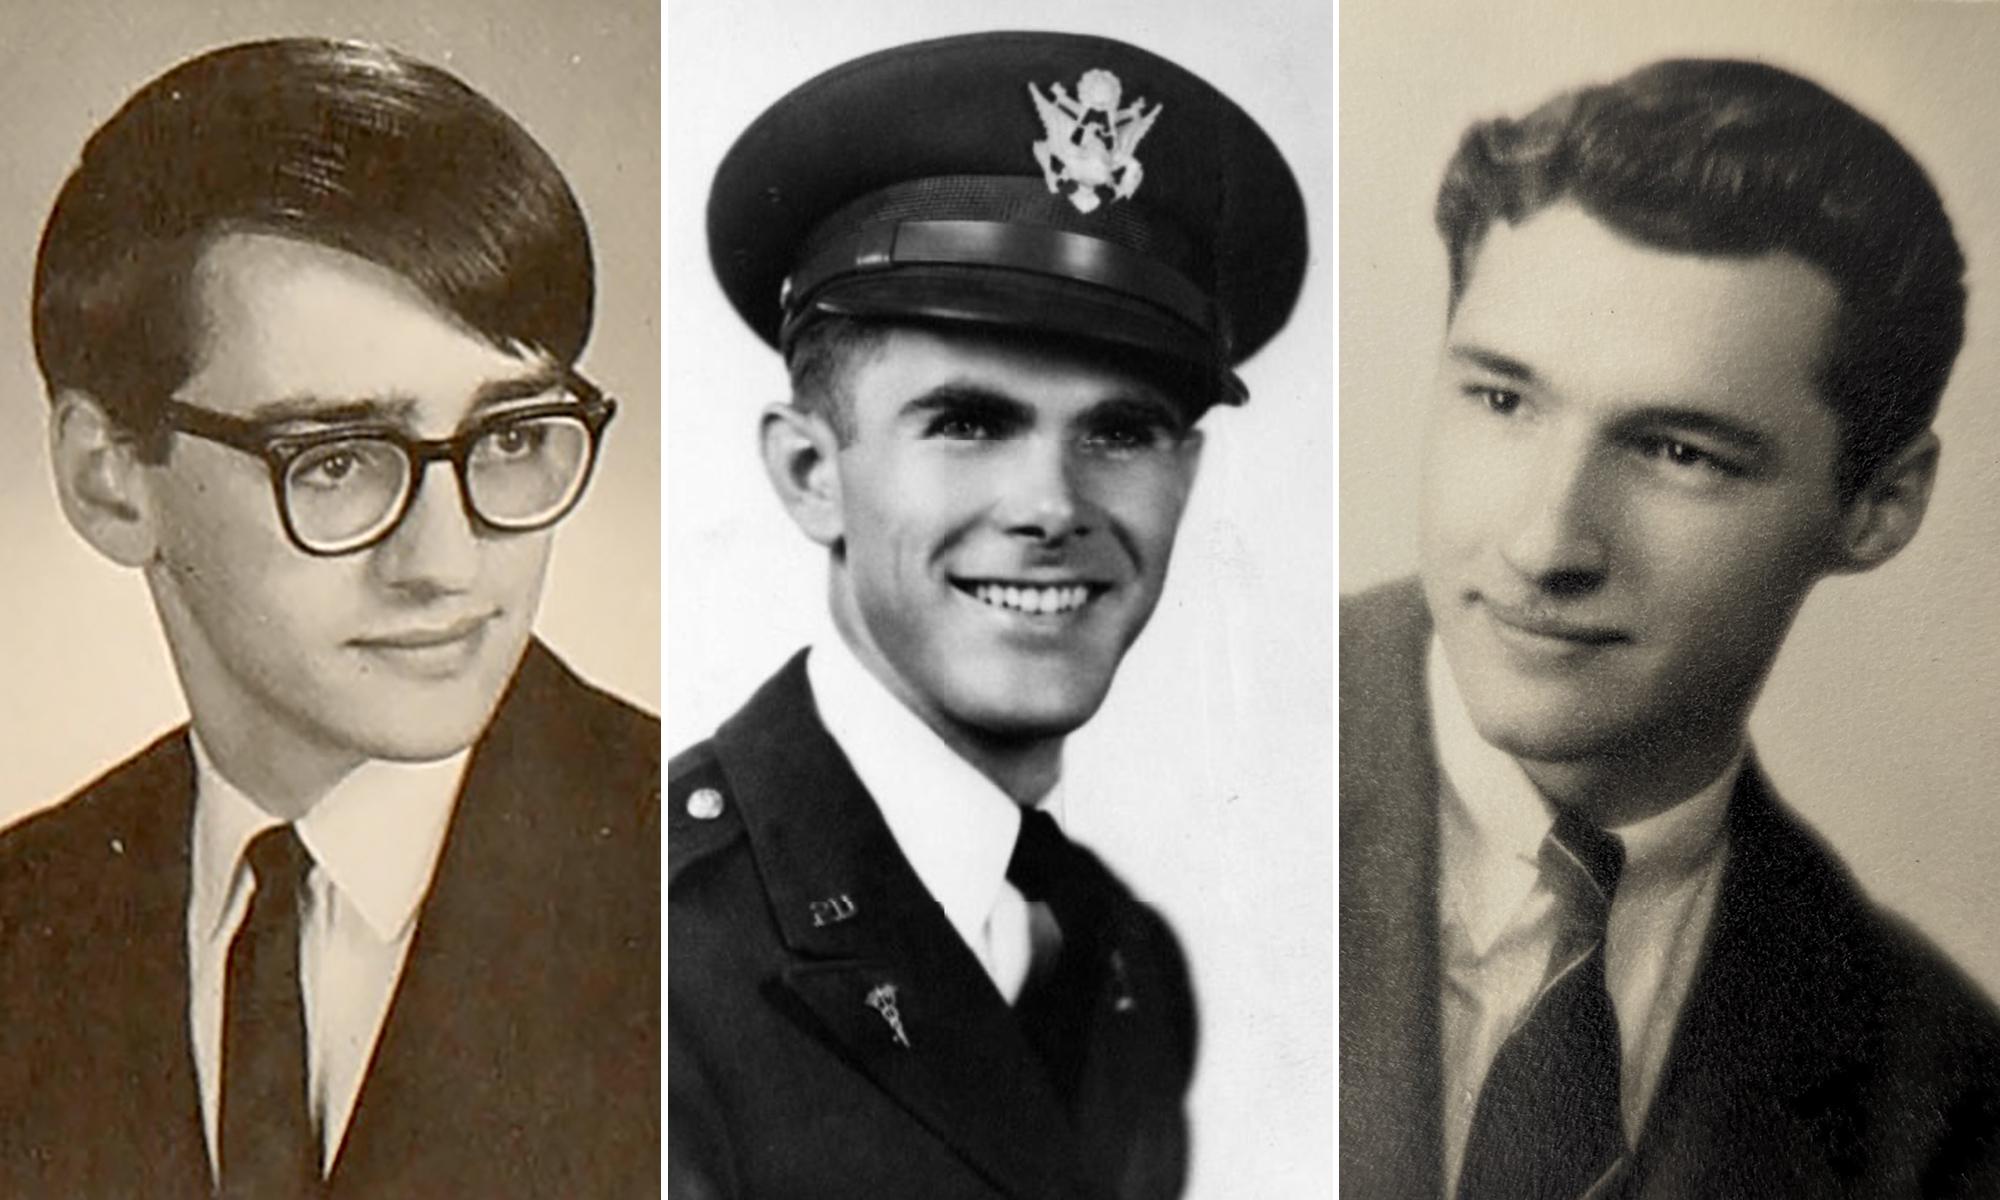 three archival yearbook photos of students from the 1940s and 1960s.